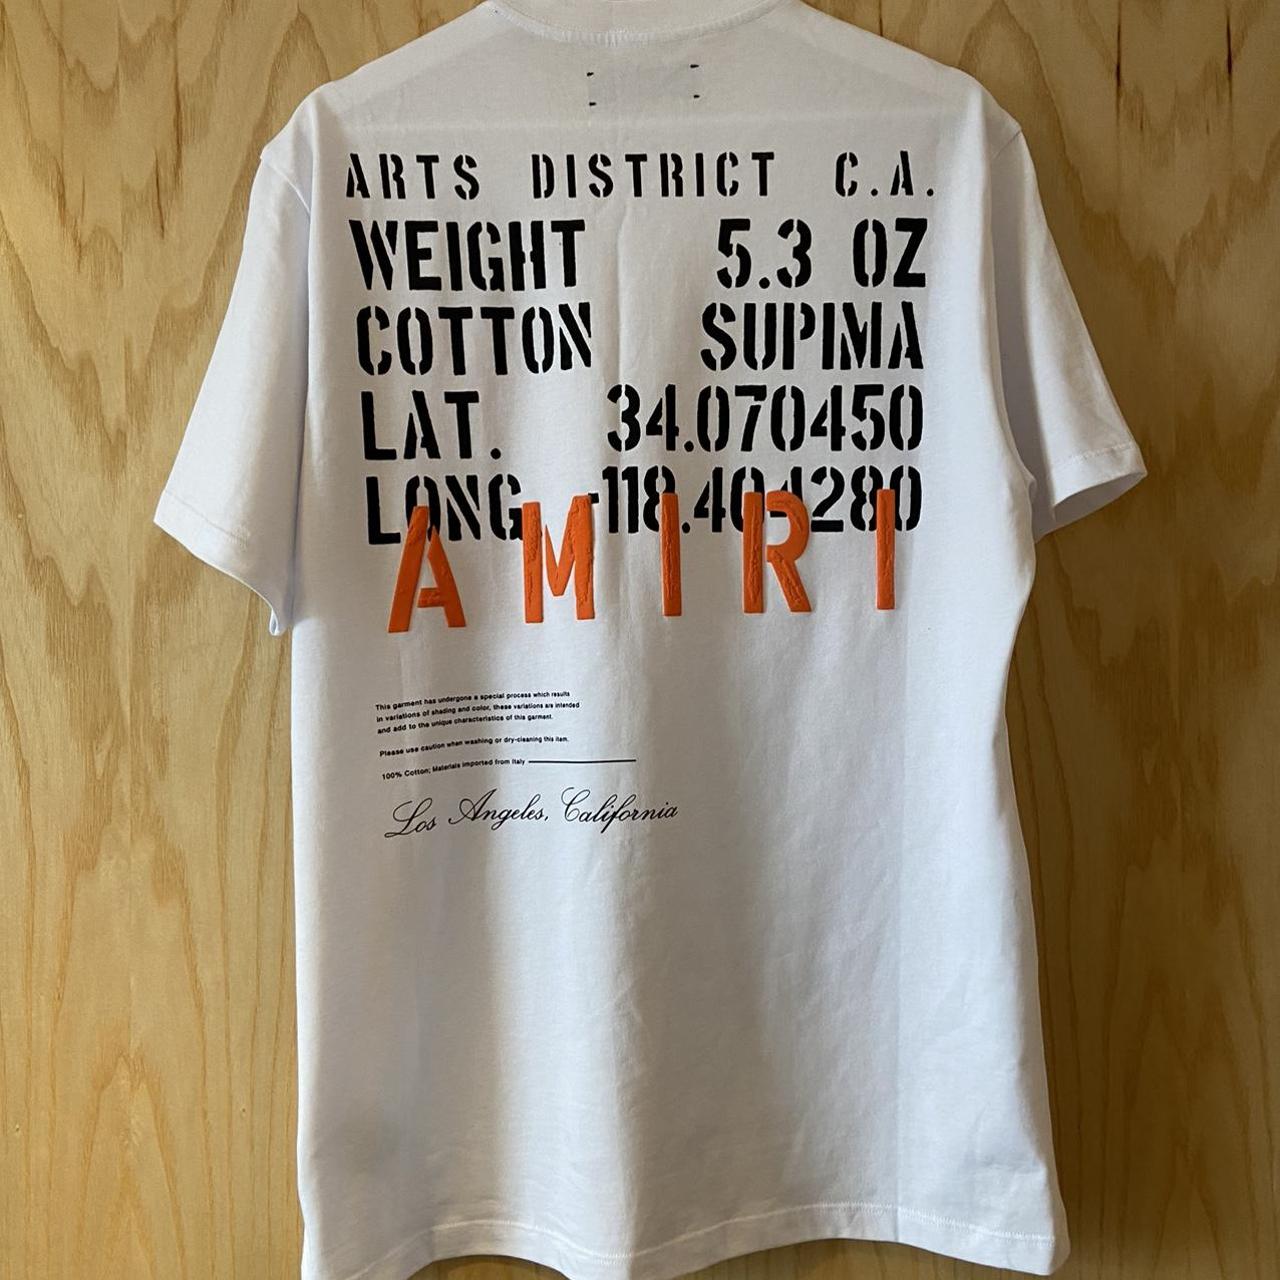 Amiri tshirt size small authentic comes with tags - Depop